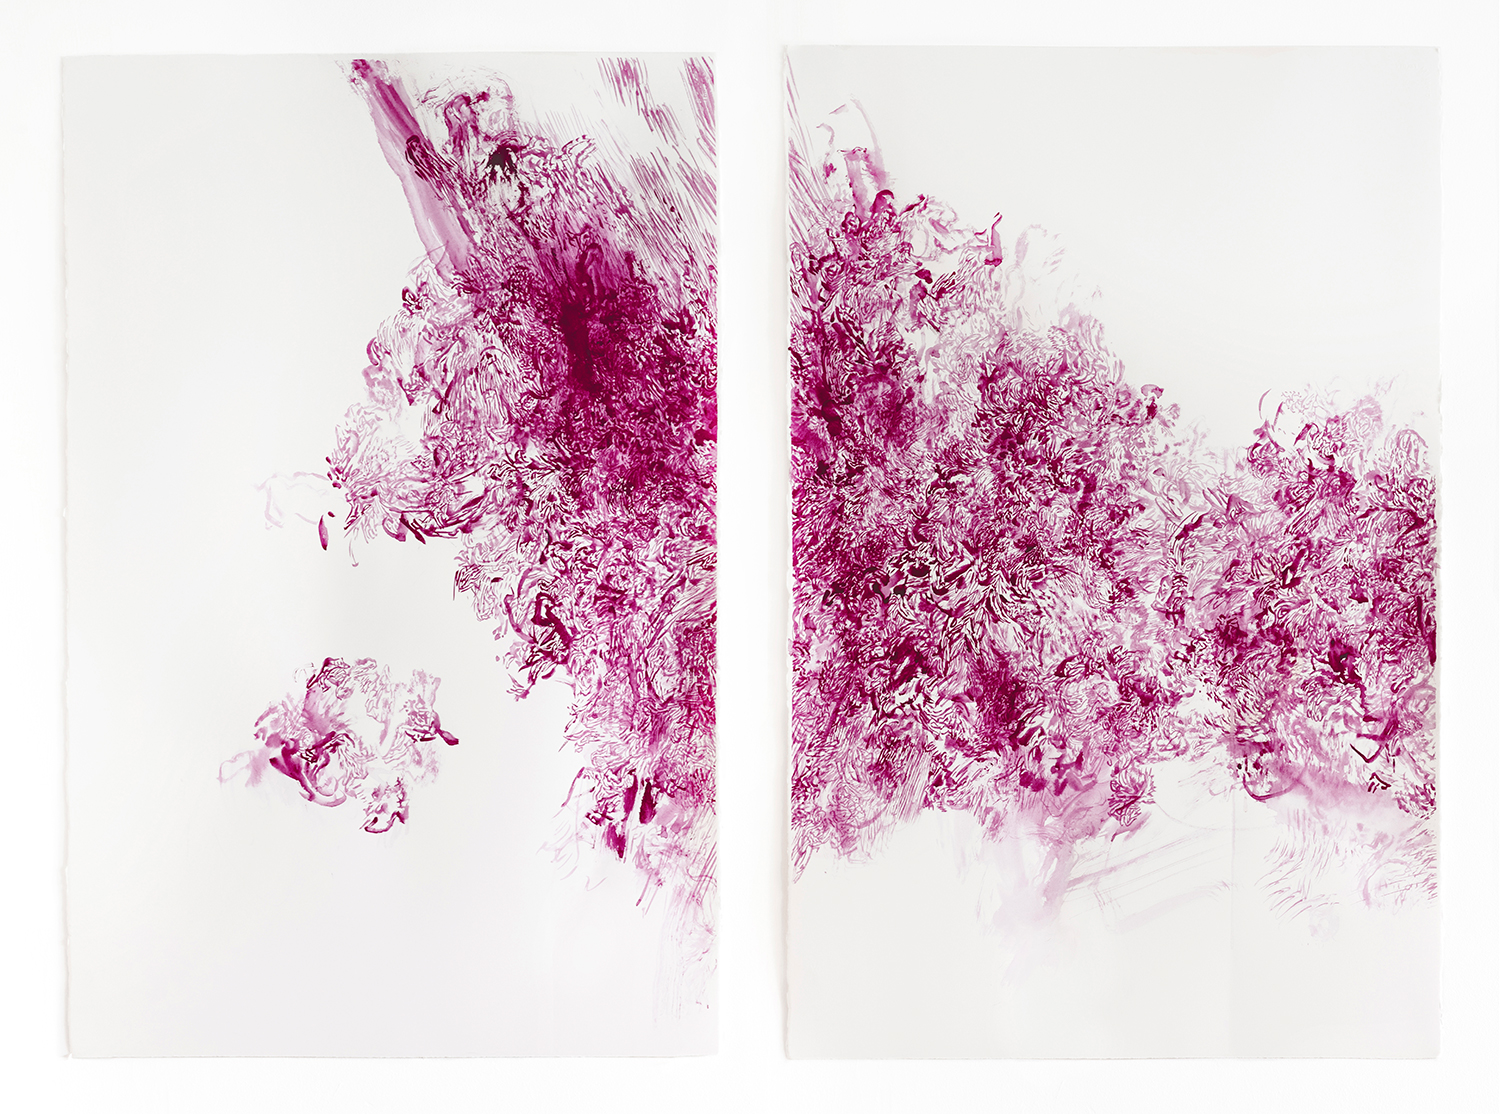 Tangled Hierarchy II Permanent magenta